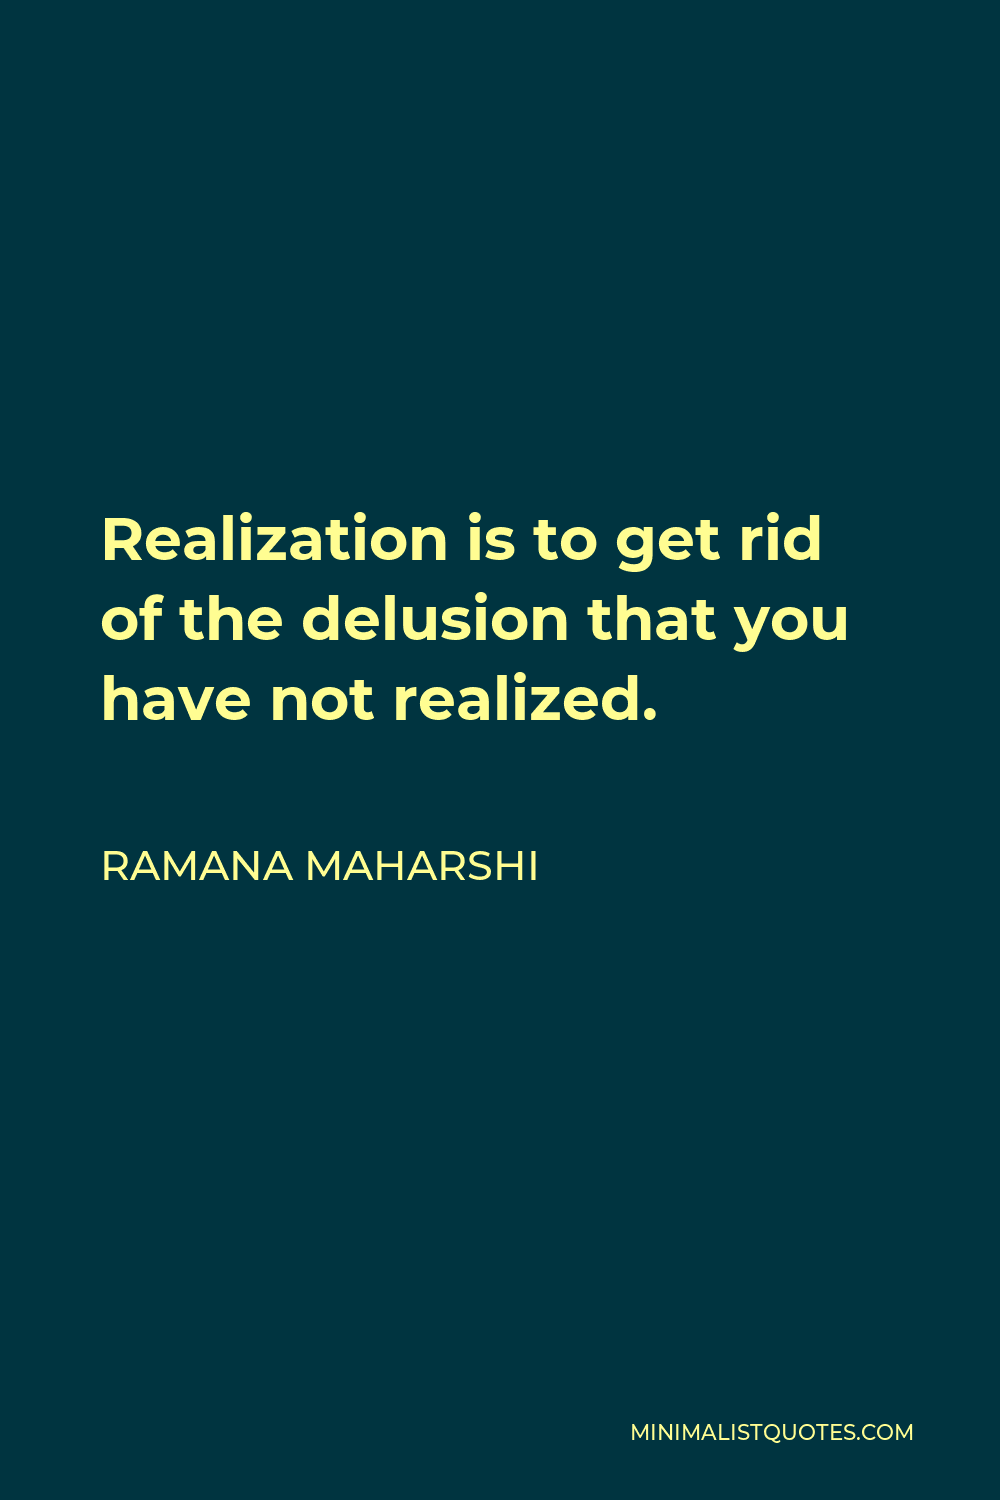 Ramana Maharshi Quote - Realization is to get rid of the delusion that you have not realized.